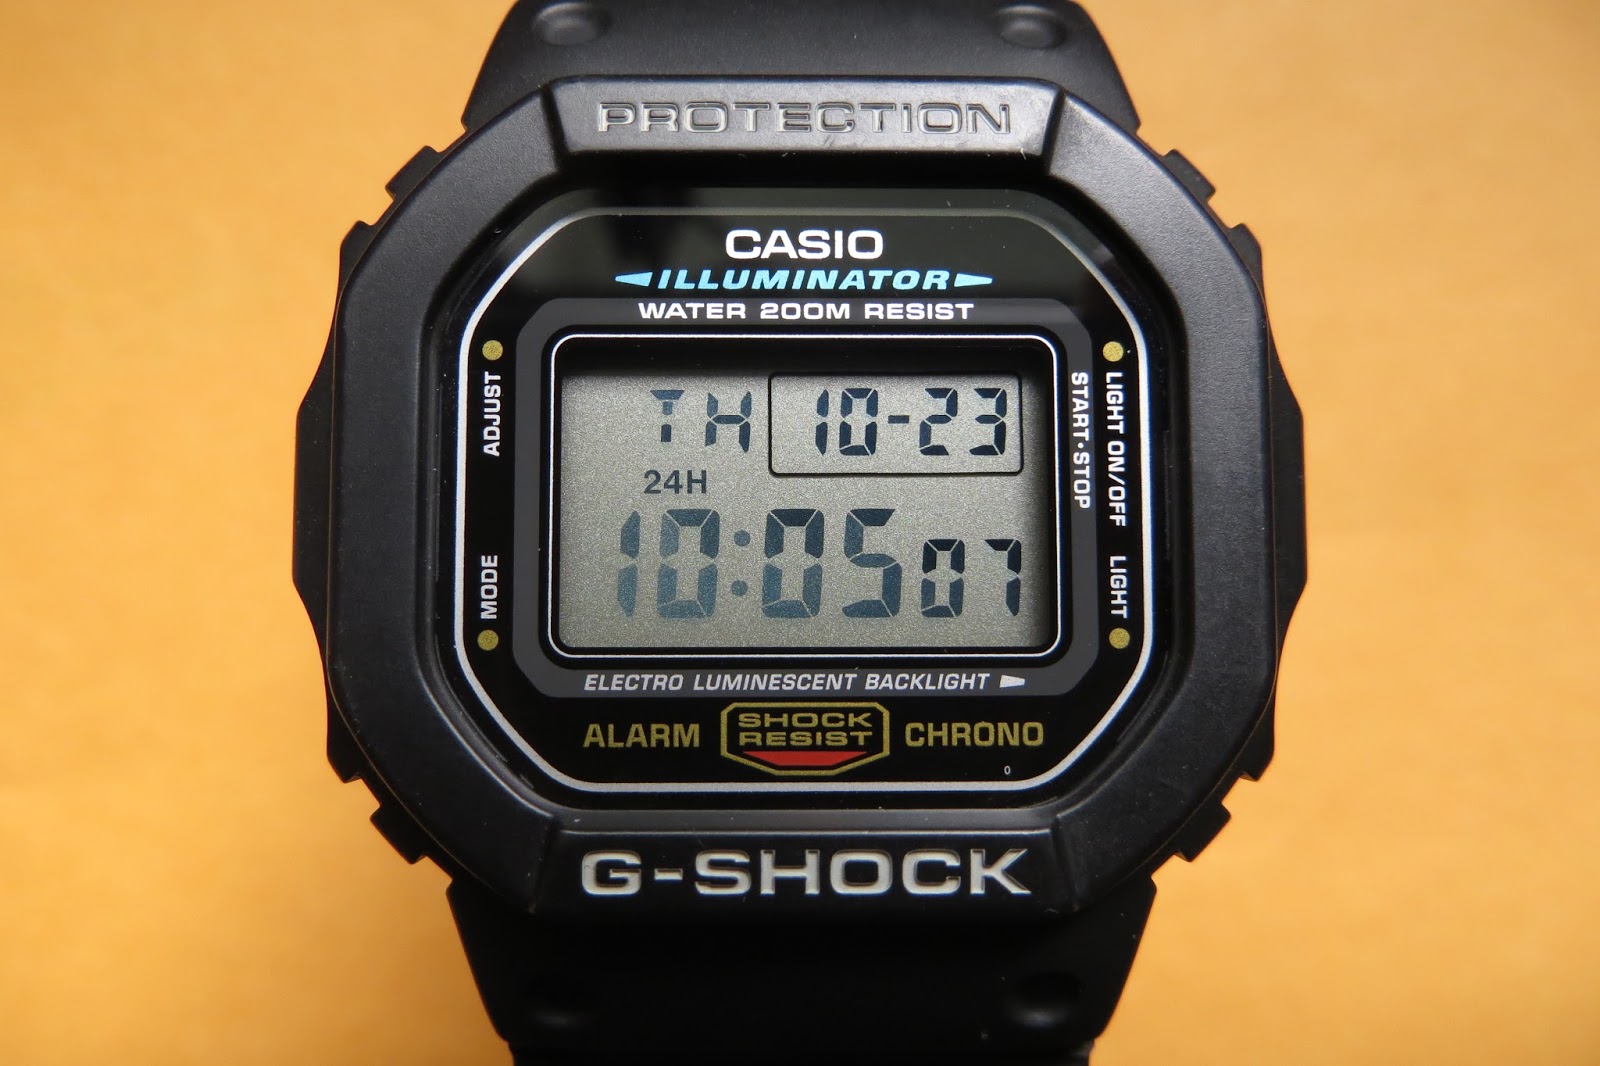 The Watch Post: Review of Casio G-Shock DW-5600E-1V - Simplicity Done Right